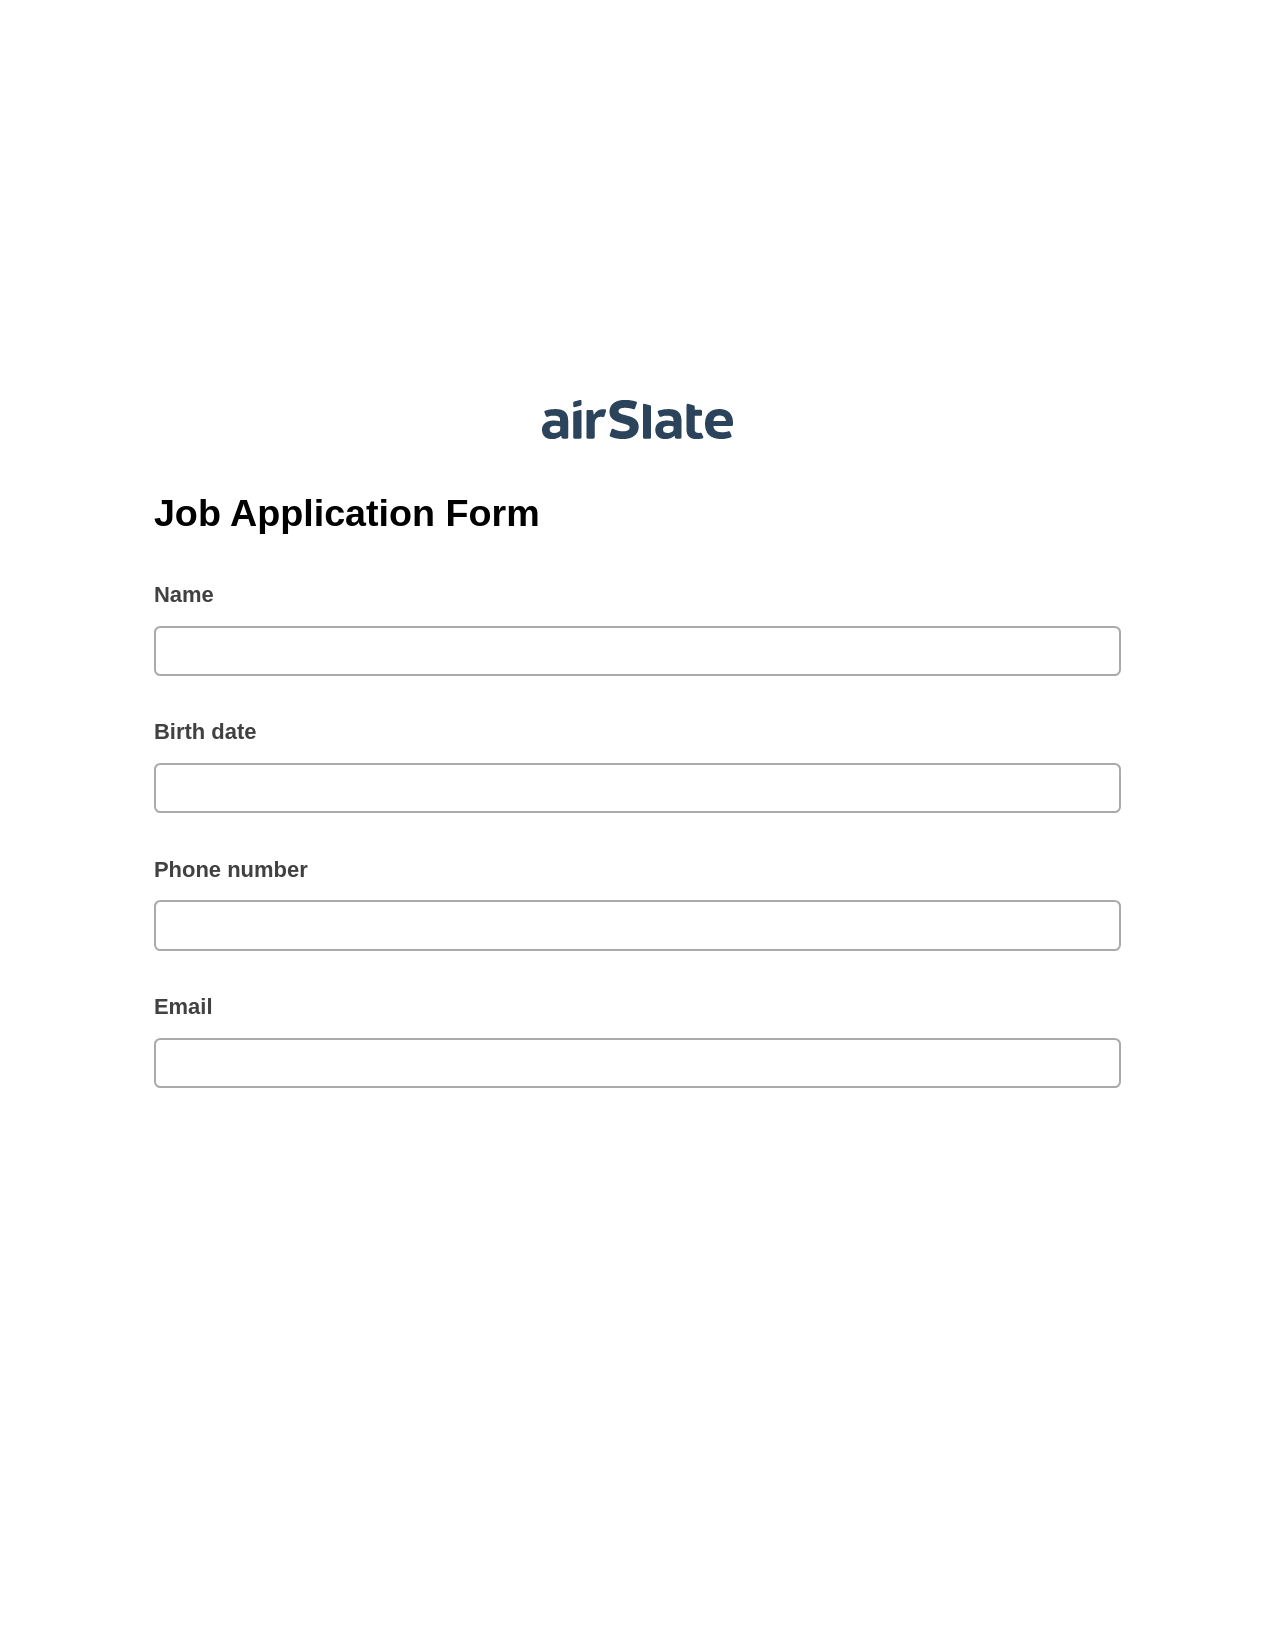 Job Application Form Pre-fill from Excel Spreadsheet Dropdown Options Bot, Create slate bot, Export to NetSuite Record Bot